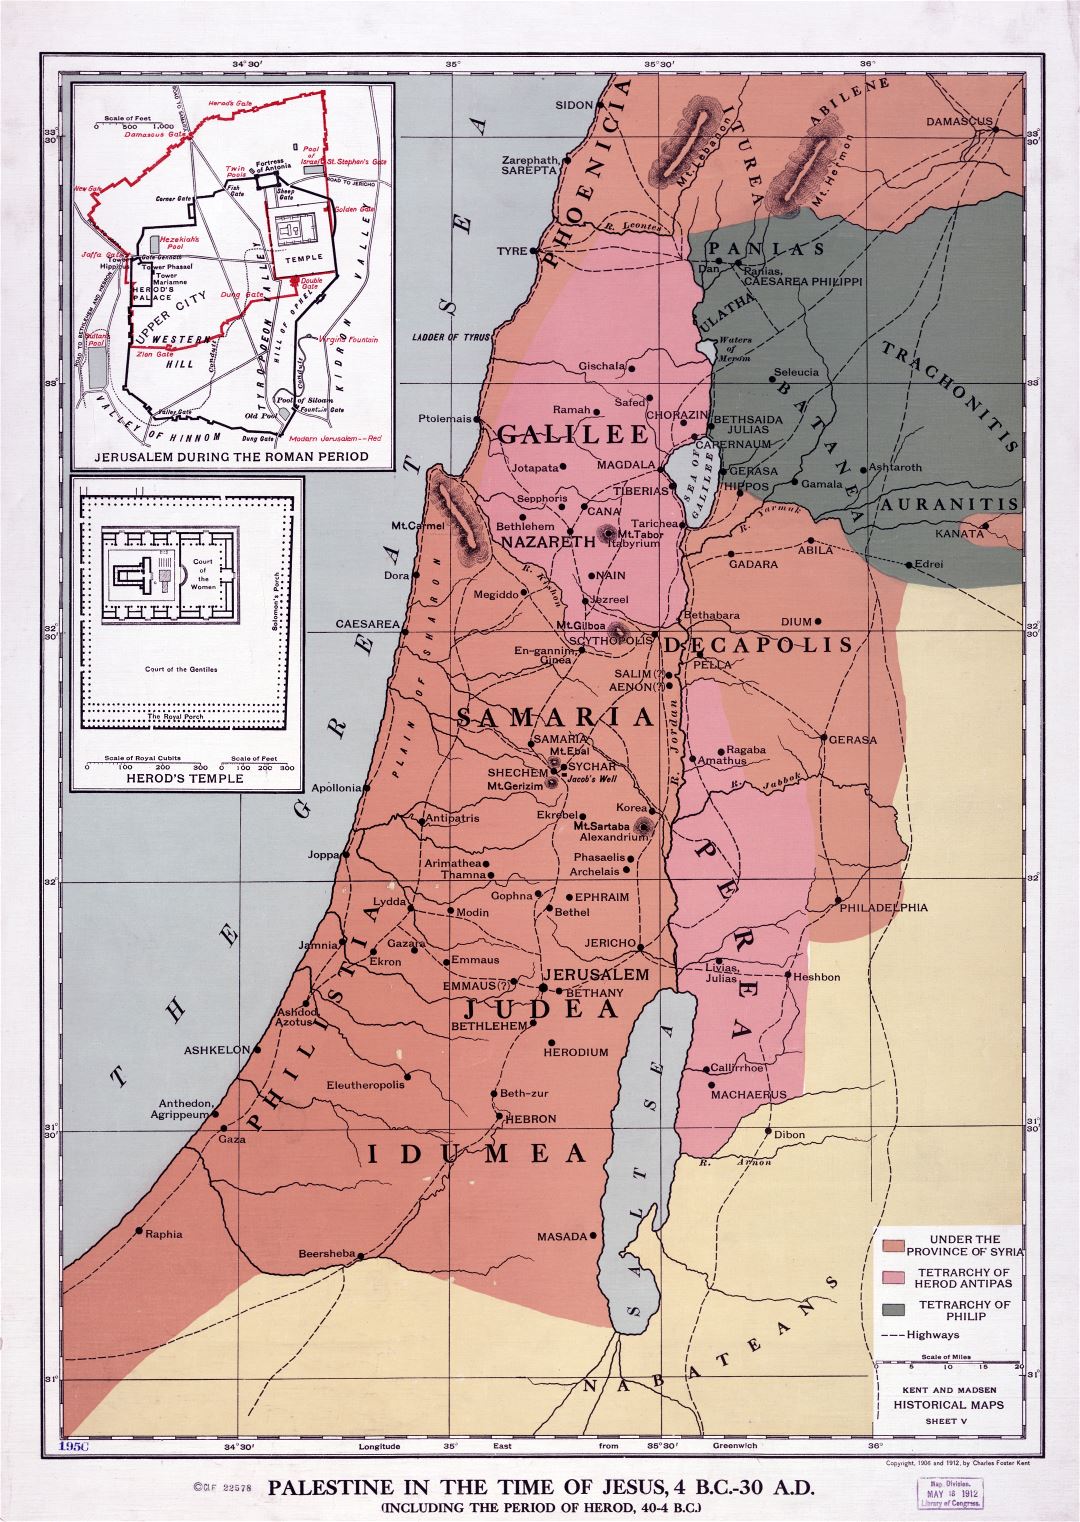 Large scale detailed old map of Palestine in the time of Jesus 4 B.C. - 30 A.D. - 1912